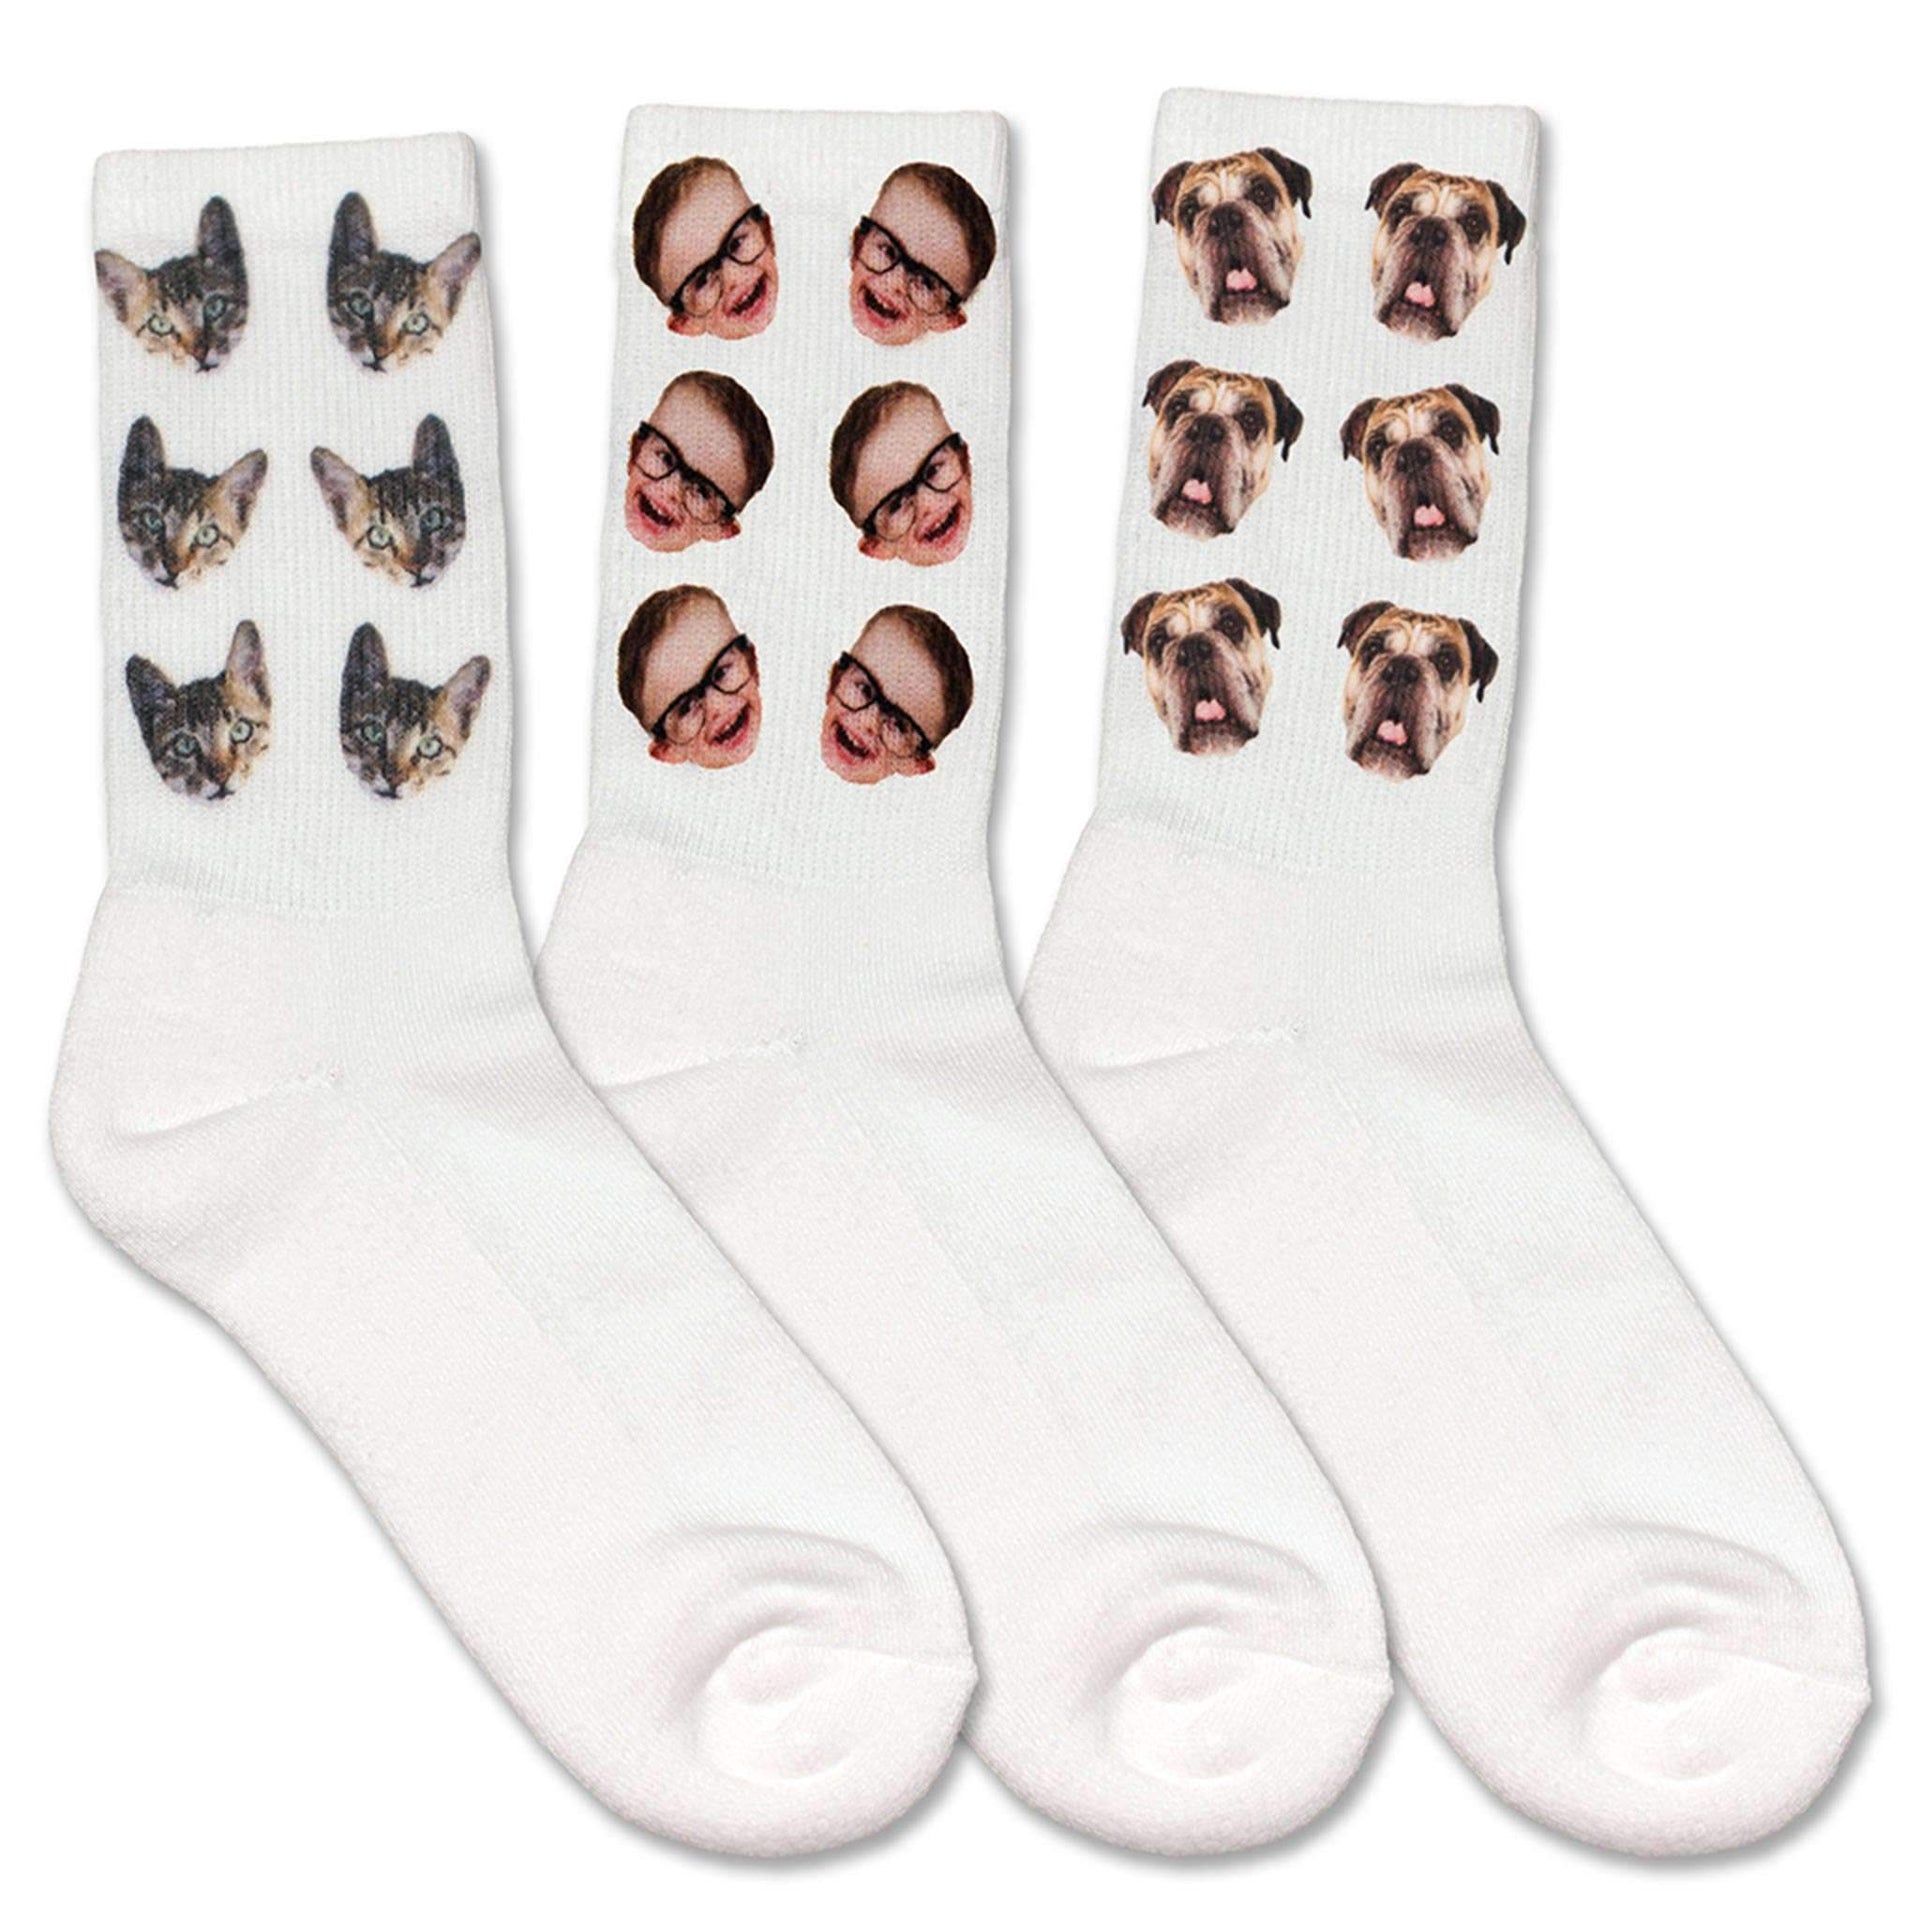 Cute photo face socks custom printed and personalized using your own photo cropped into the image and printed all over on both sides of the white cotton crew socks is the perfect unique gift.